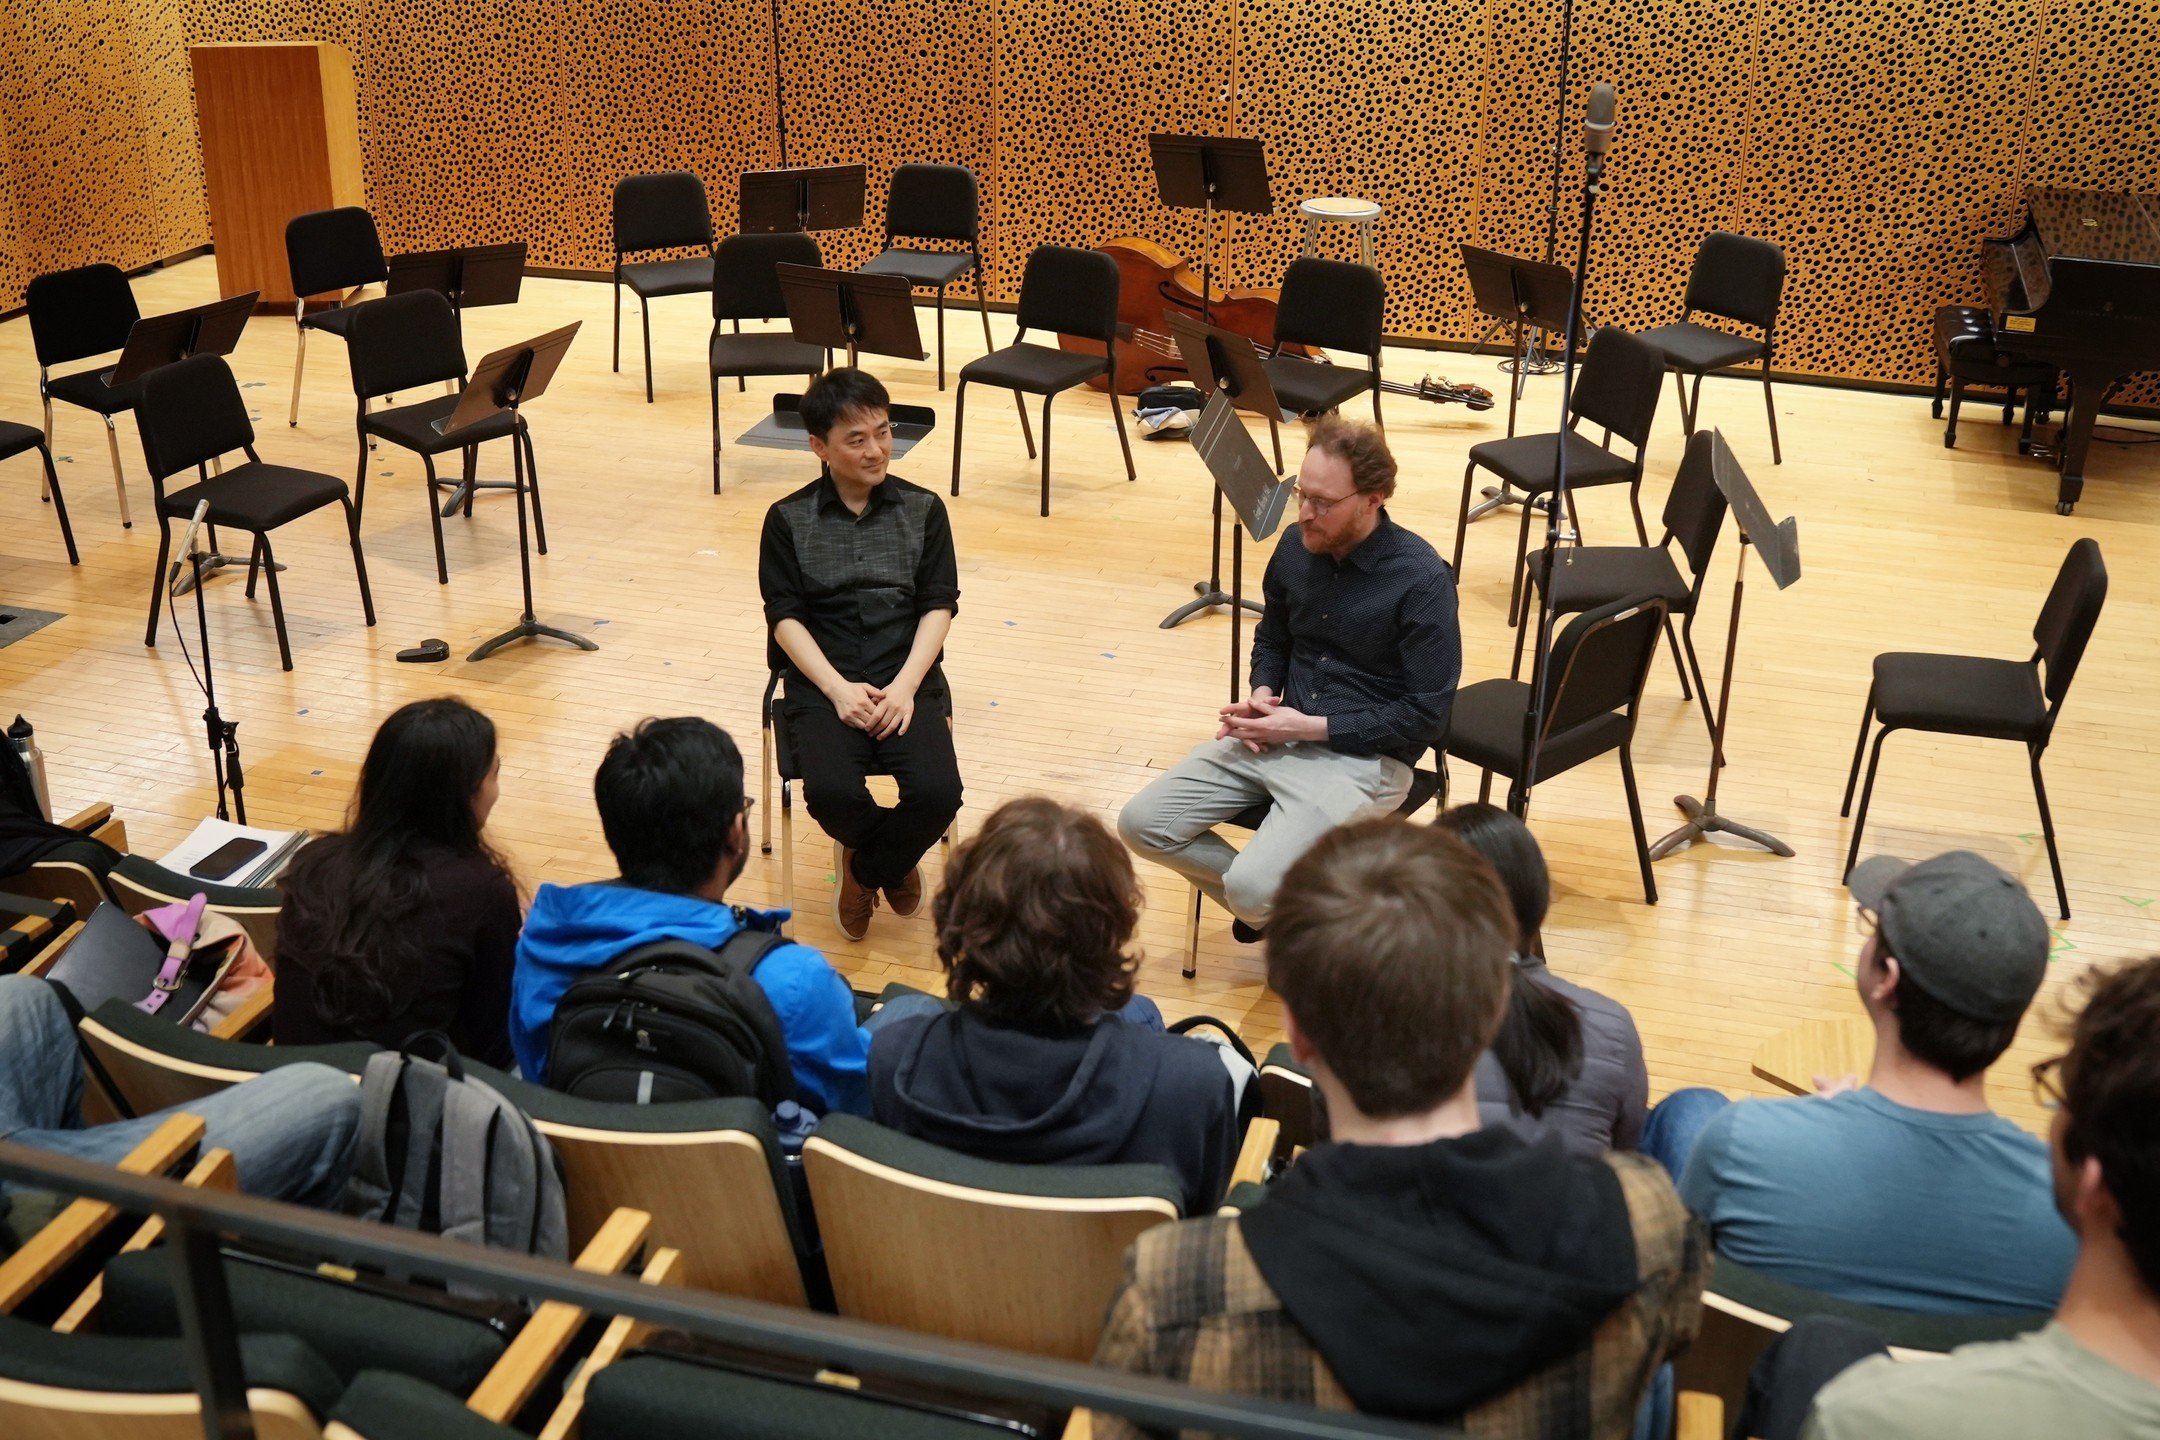 Besides the performance, @dkpersonal and @ericnathanmusic conducted a mini seminar for the Brown music composition major students.🎼📔 

#nycp #nycpmusic #newyorkclassicalplayers #brownuniversity #residency #dongminkim #ericnathan #seminar 
📸by Yo H